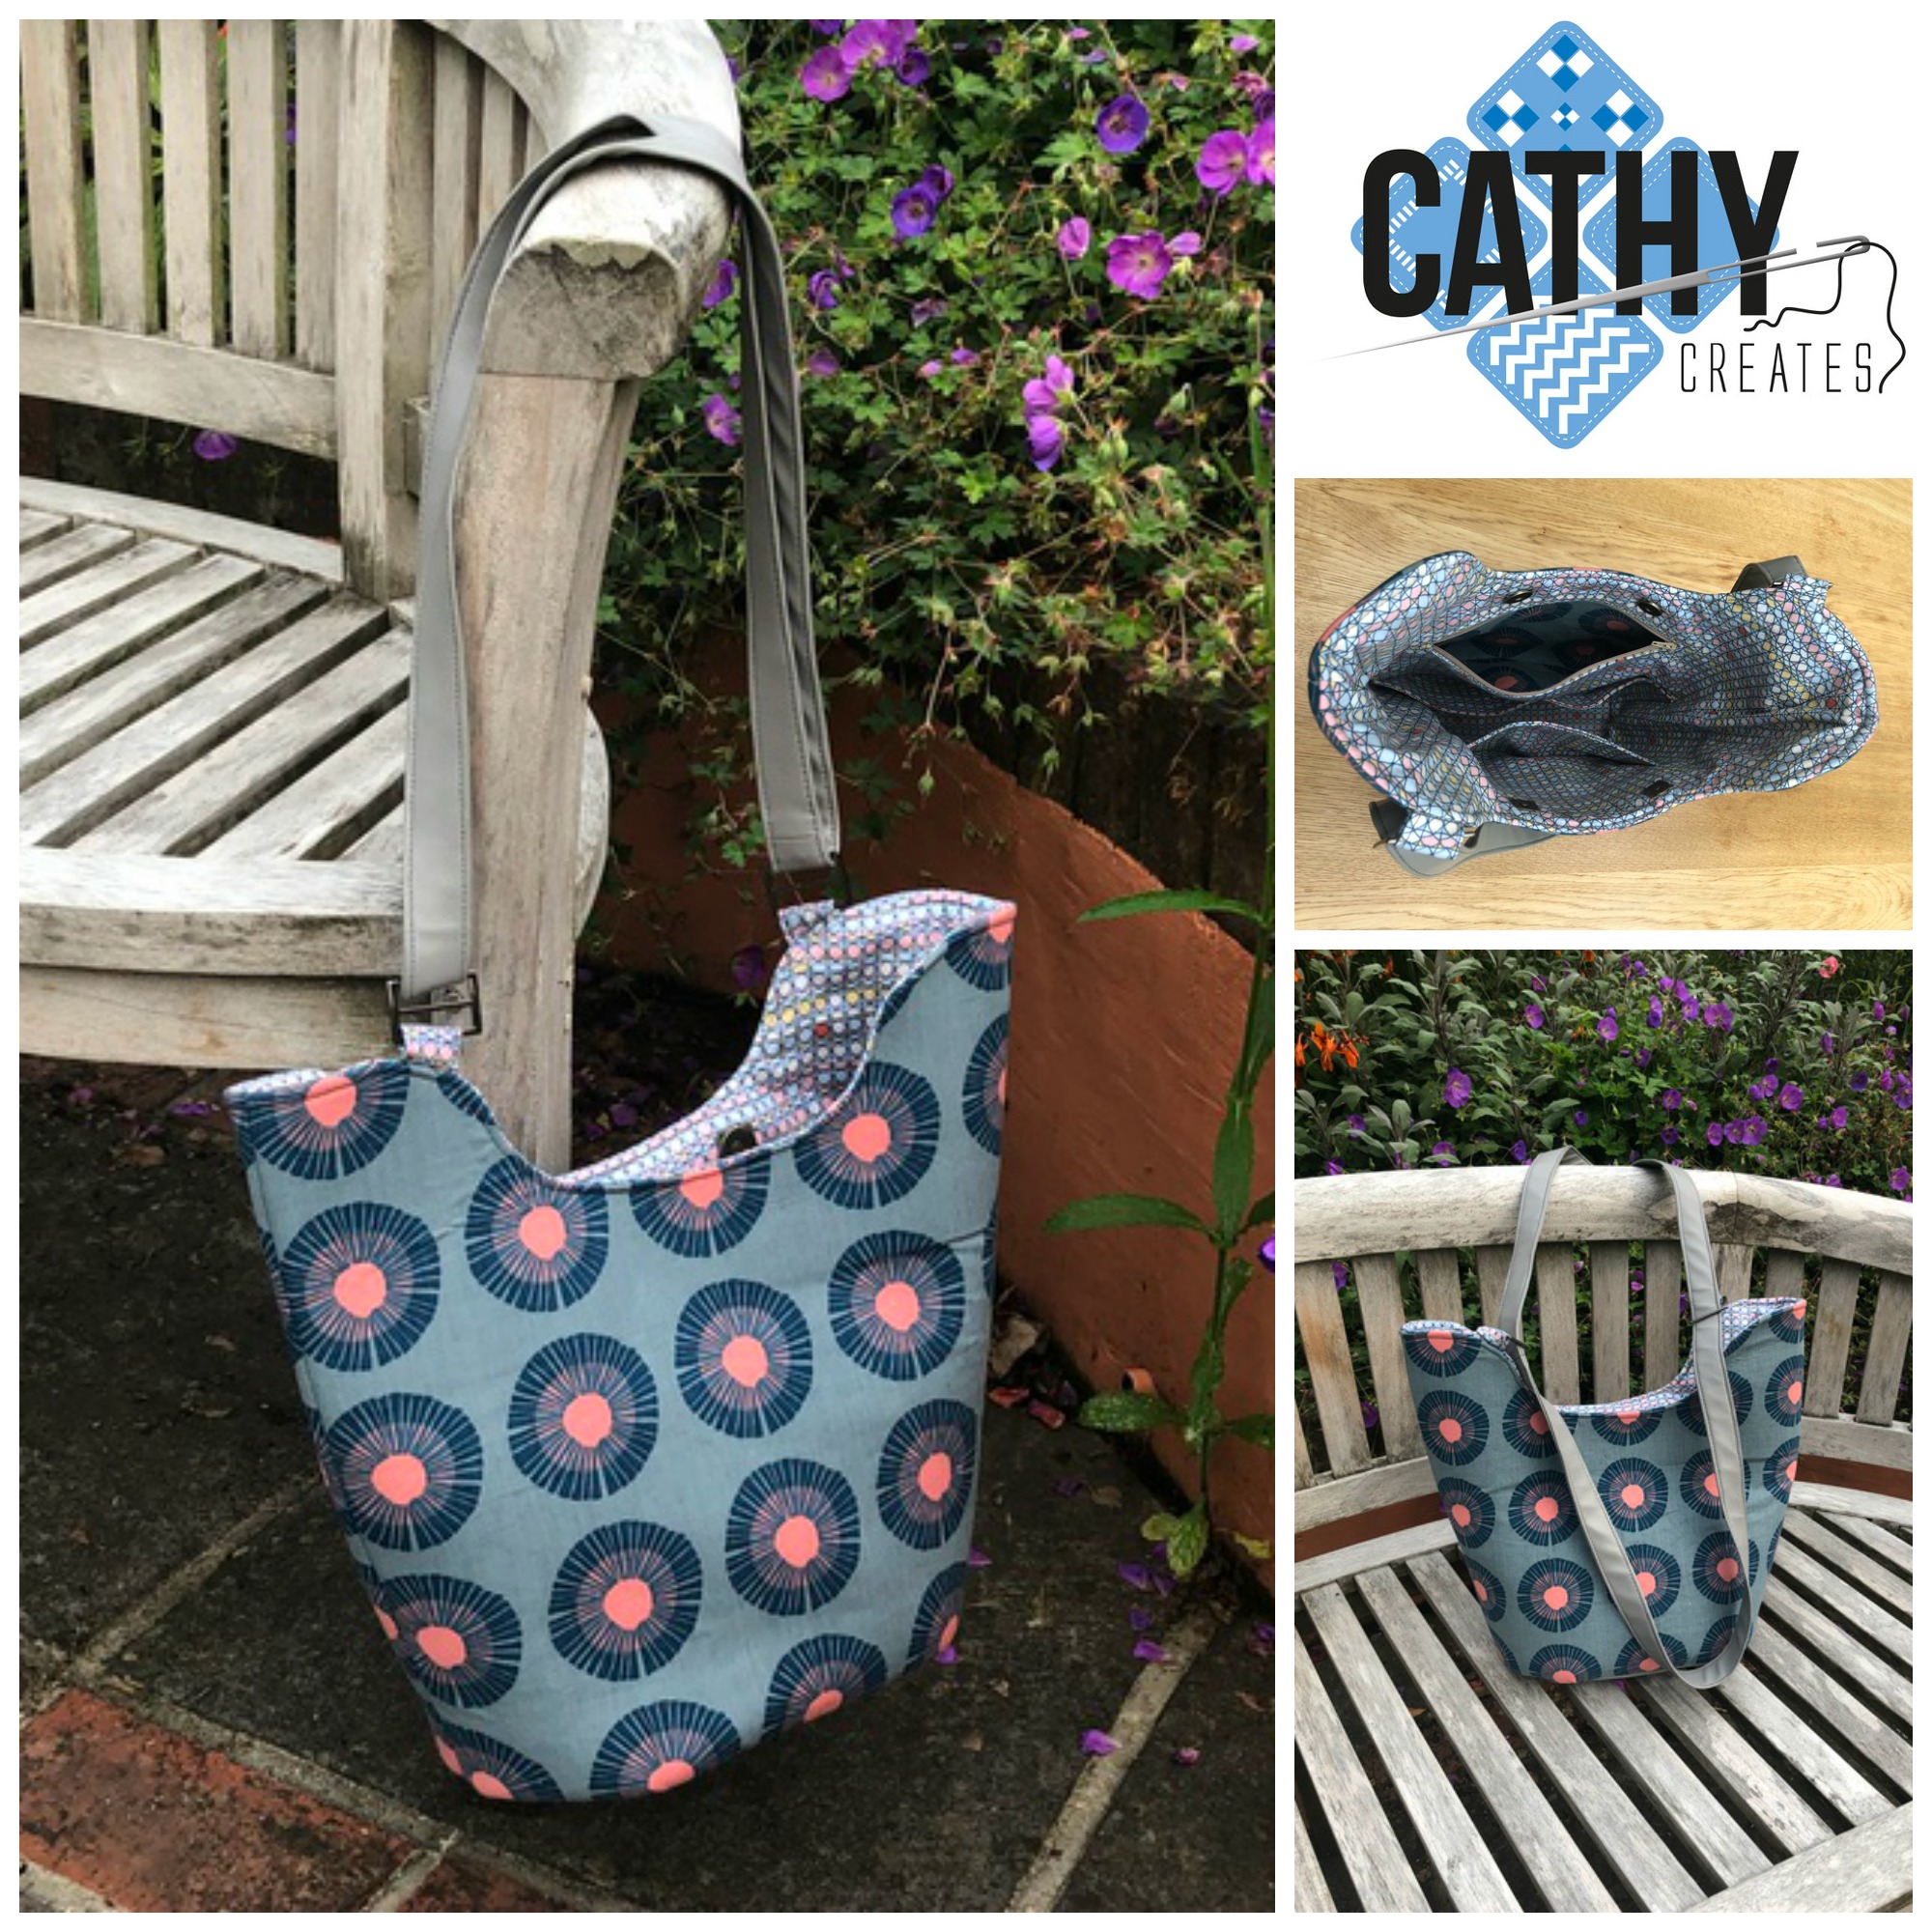 Blog - {How to} Big Pocket Tote Sewing Patterns by Mrs H